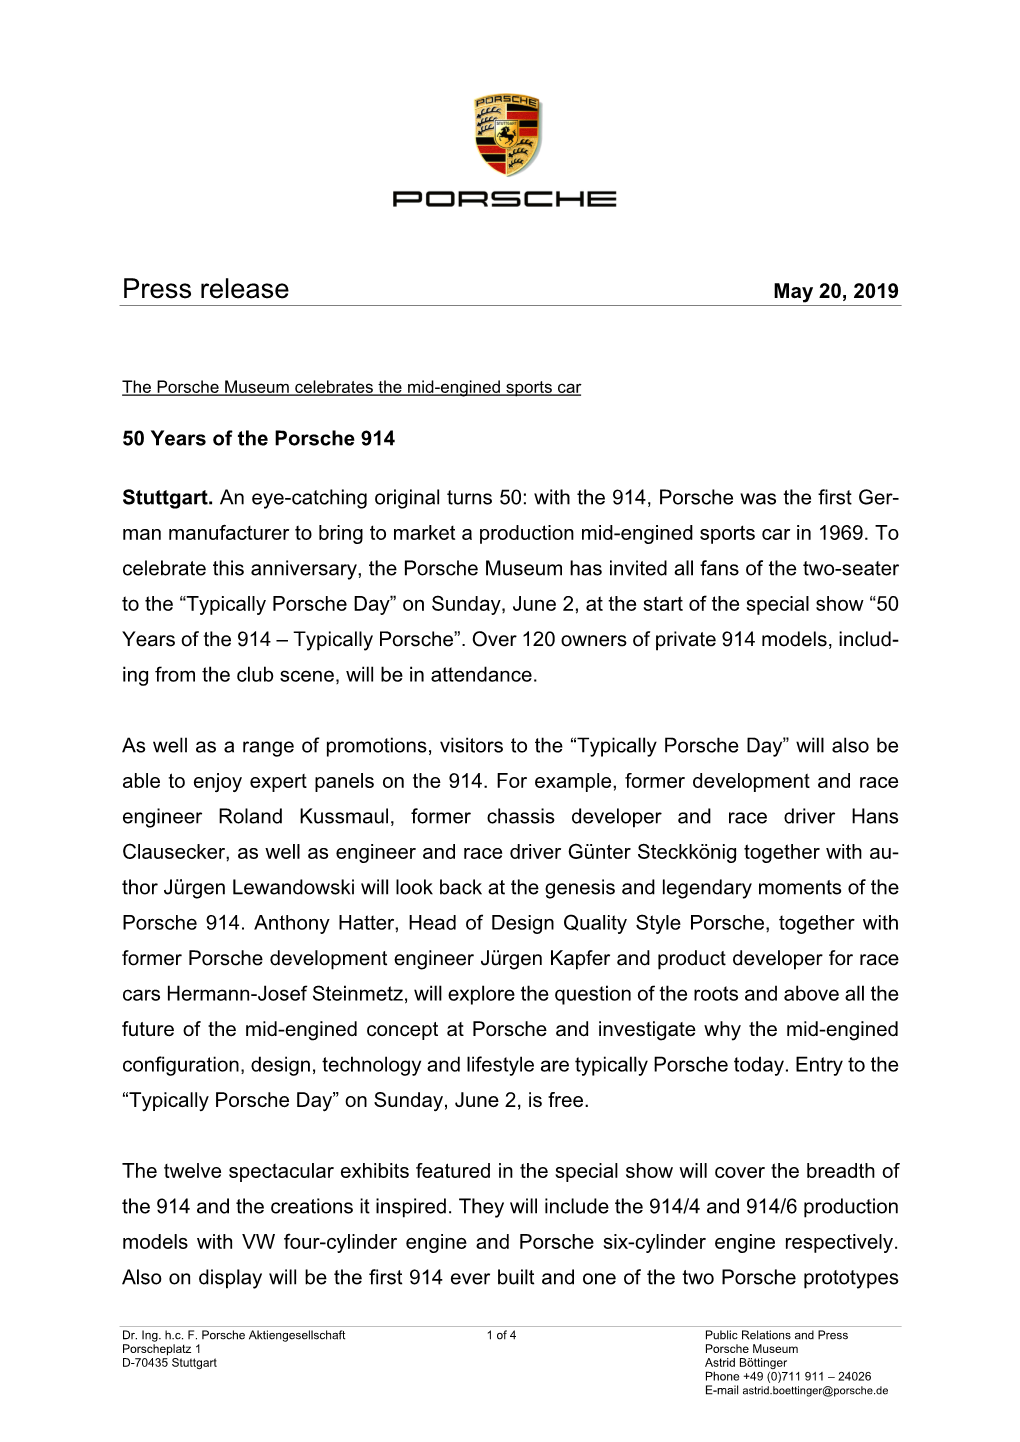 Press Release May 20, 2019